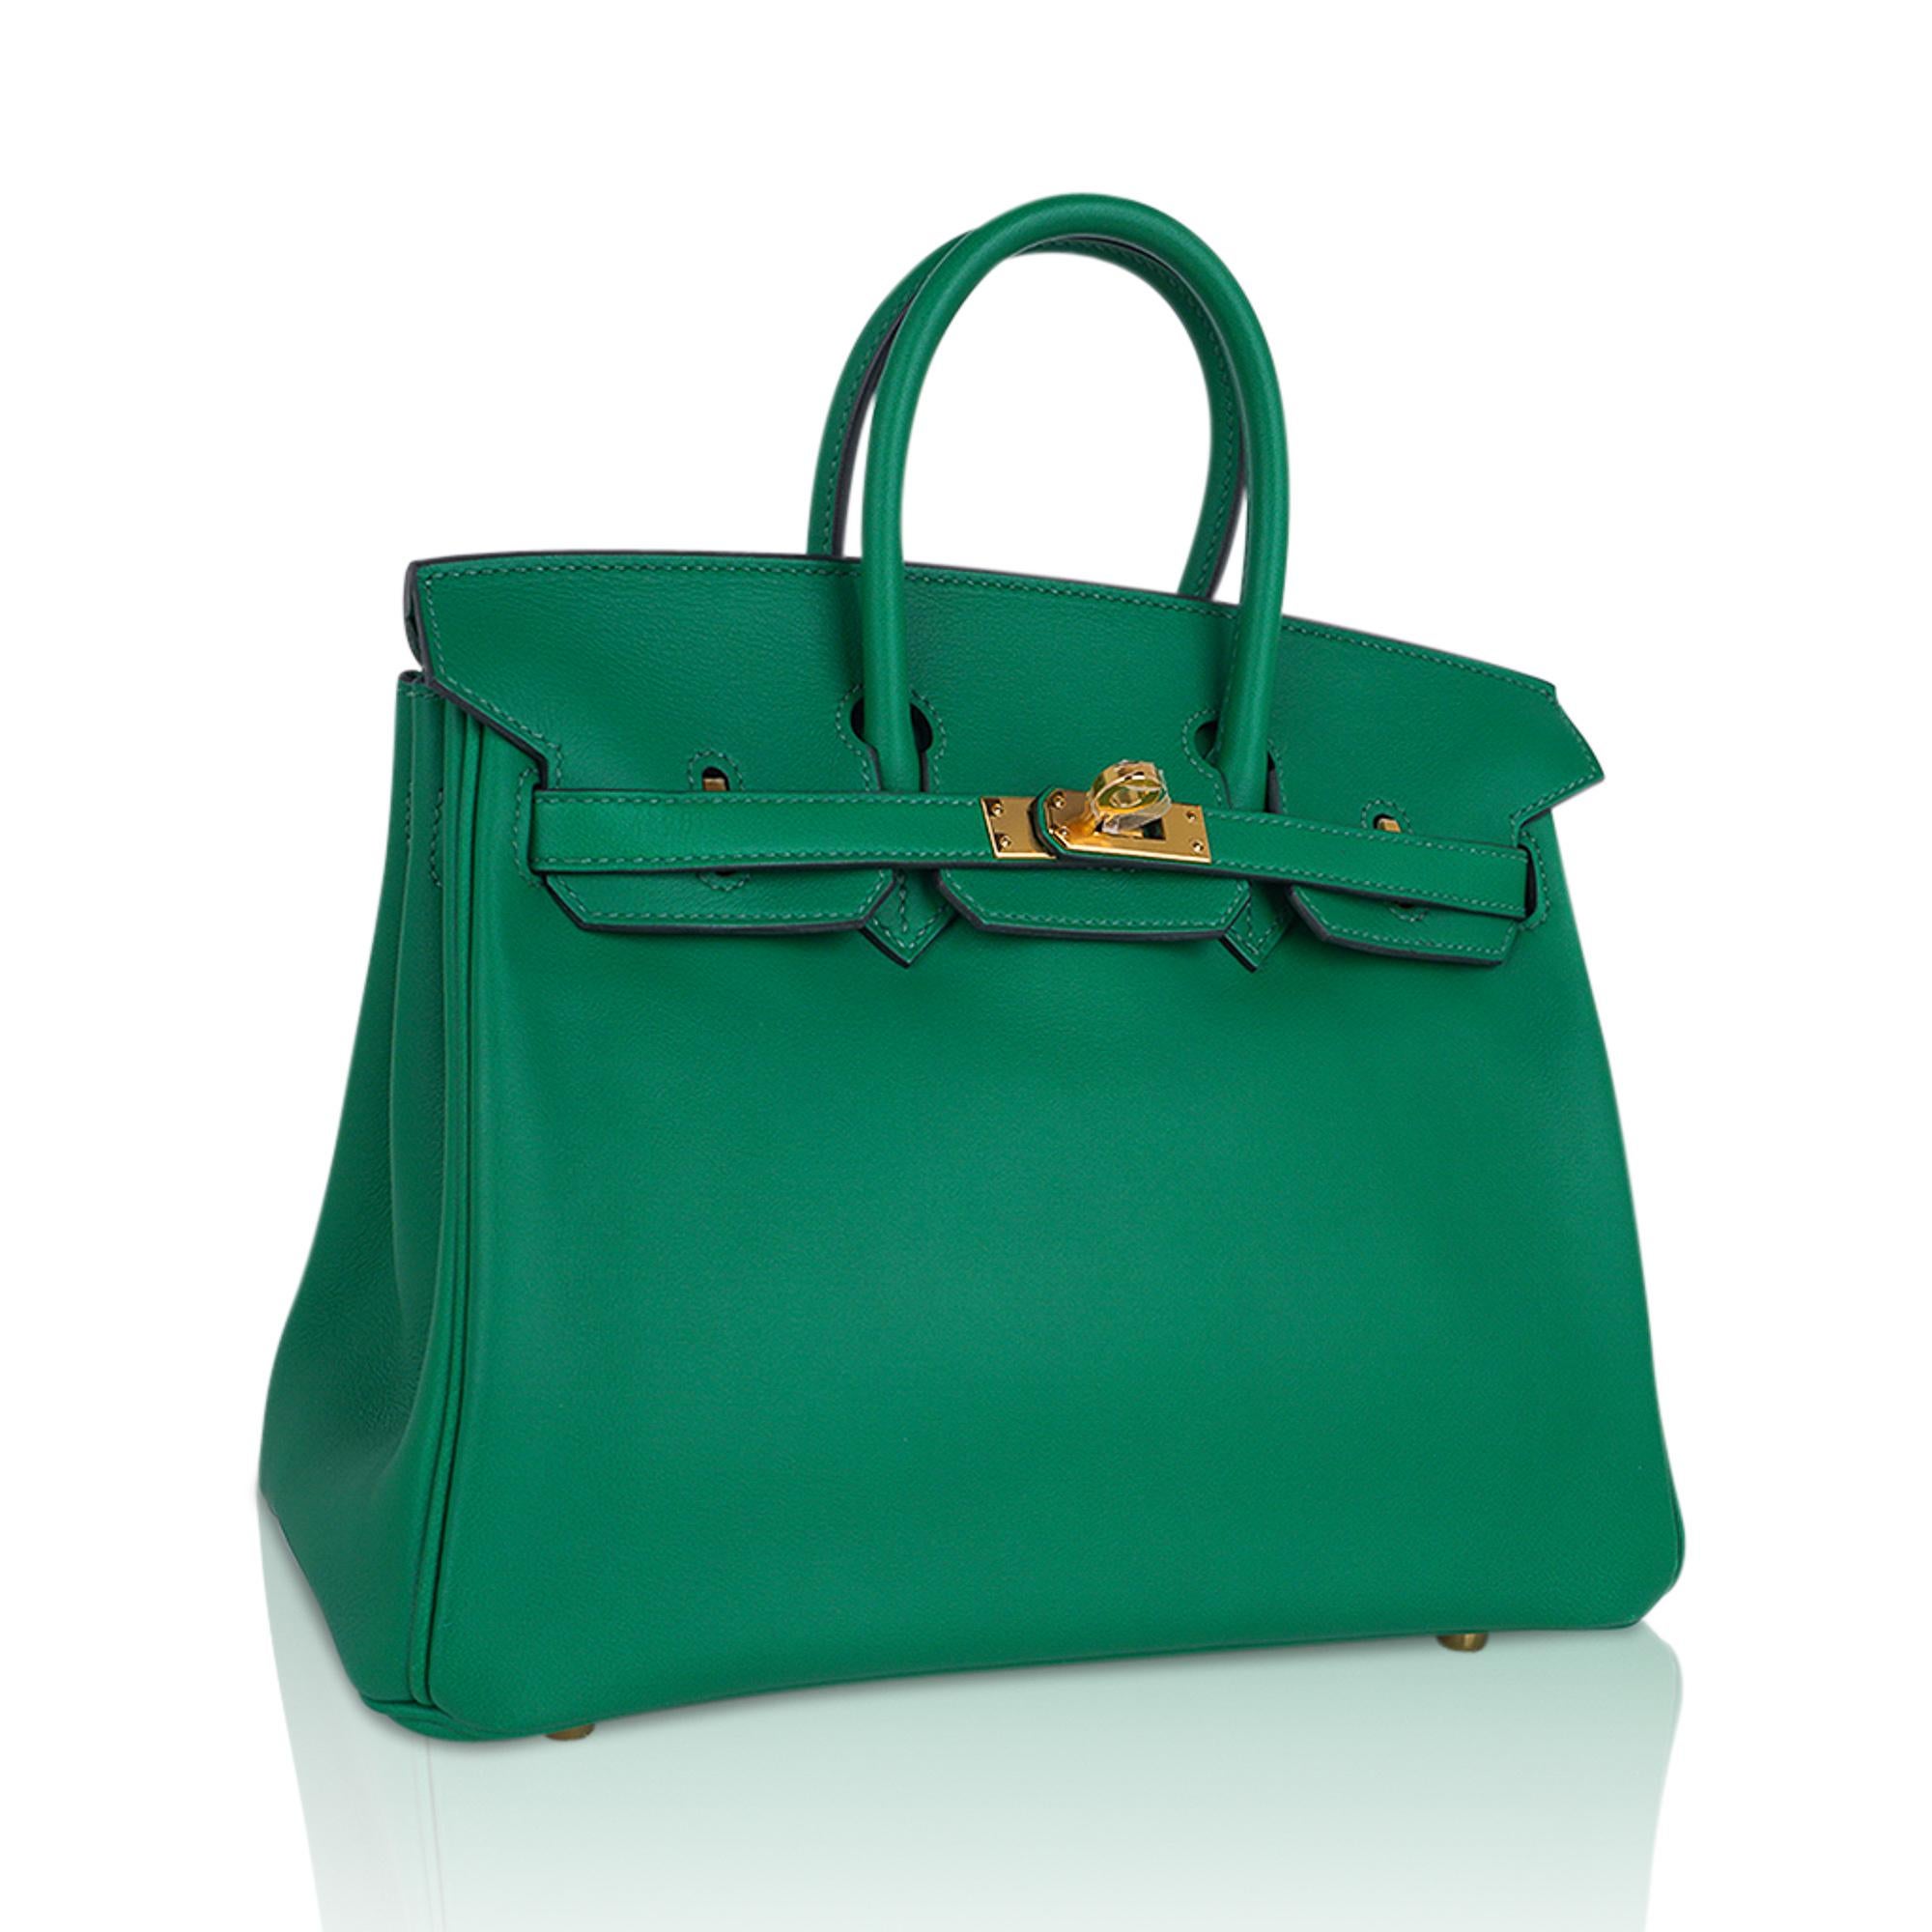 Mightychic offers an Hermes Birkin 25 bag featured in coveted Cactus.
This exquisite jewel toned green is absolutely neutral.
A perfect year round colour Hermes Birkin bag.
Lush with Gold hardware.
Swift leather.
Very minor corner wear. Plastic on